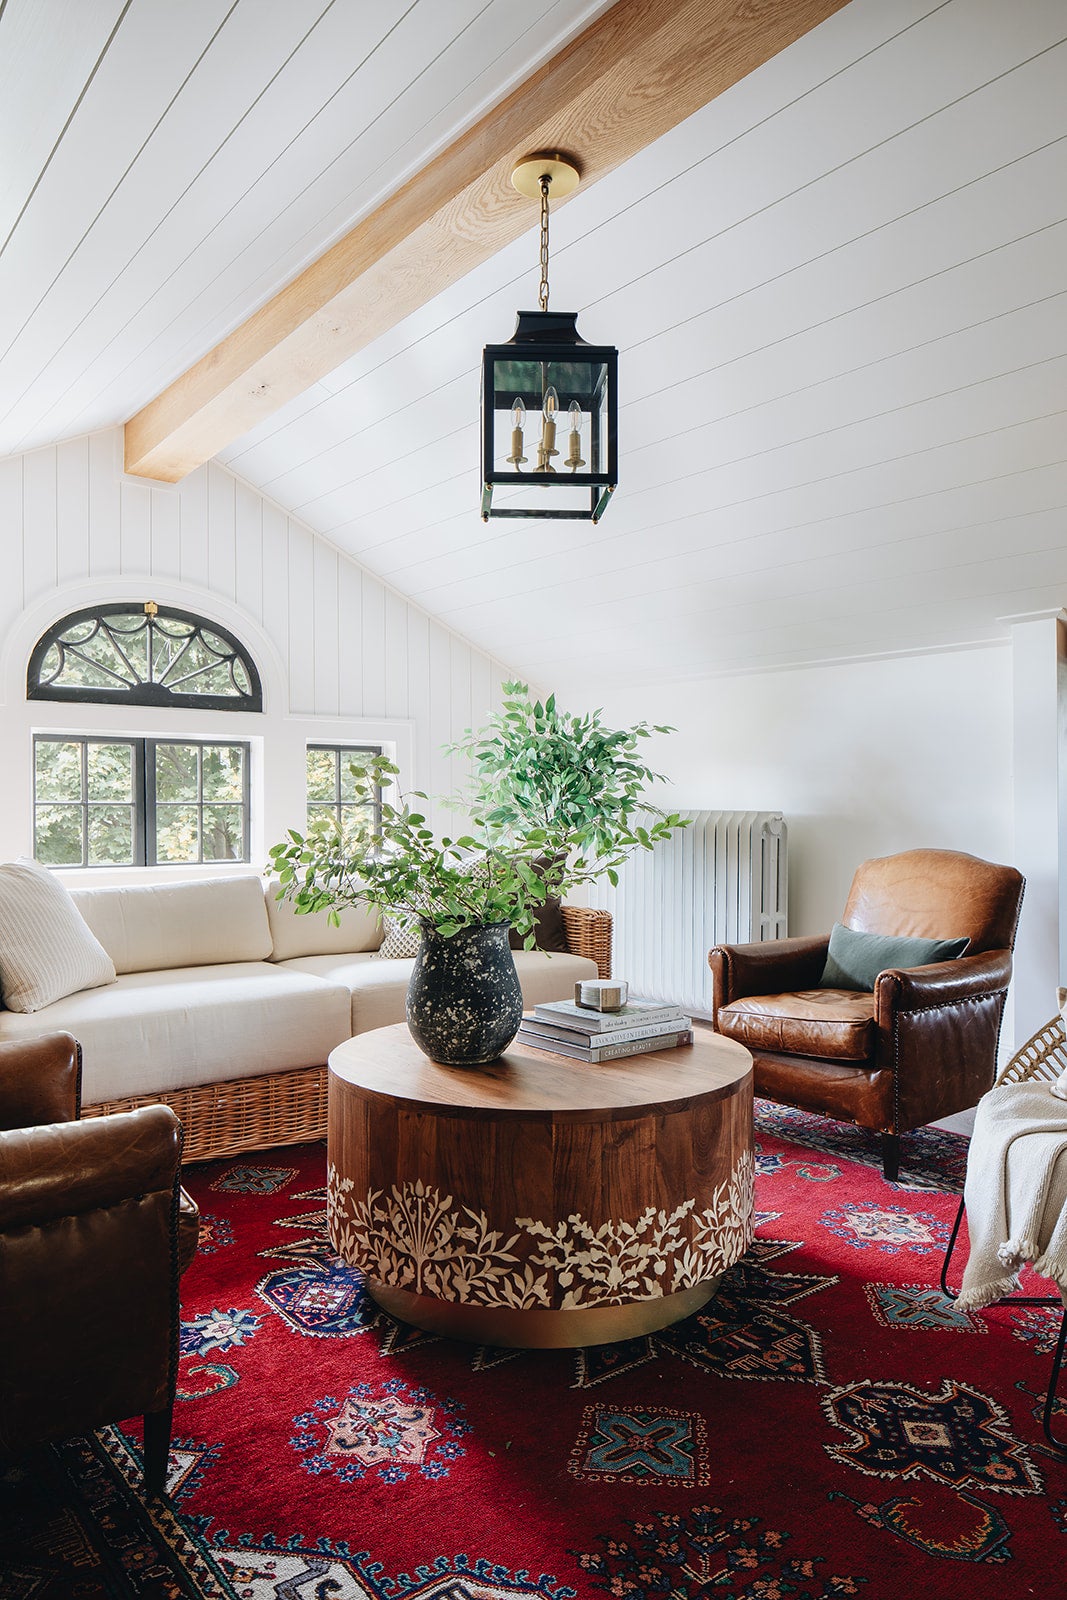 9 Tips to Choose the Right Pendant Light for Your Living Room